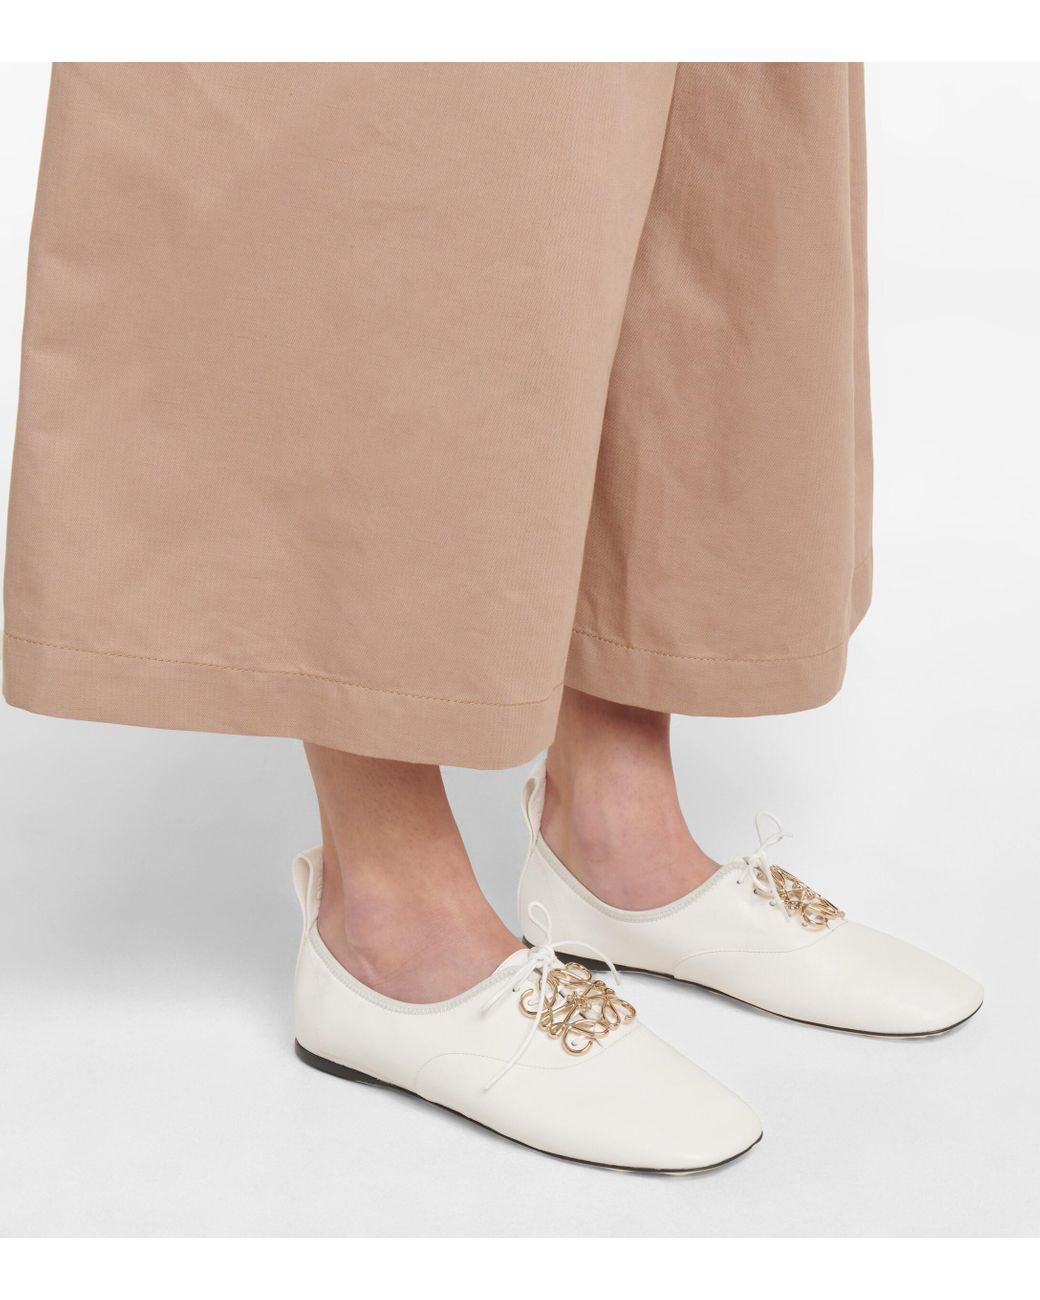 Loewe Anagram Leather Derby Shoes in White - Lyst